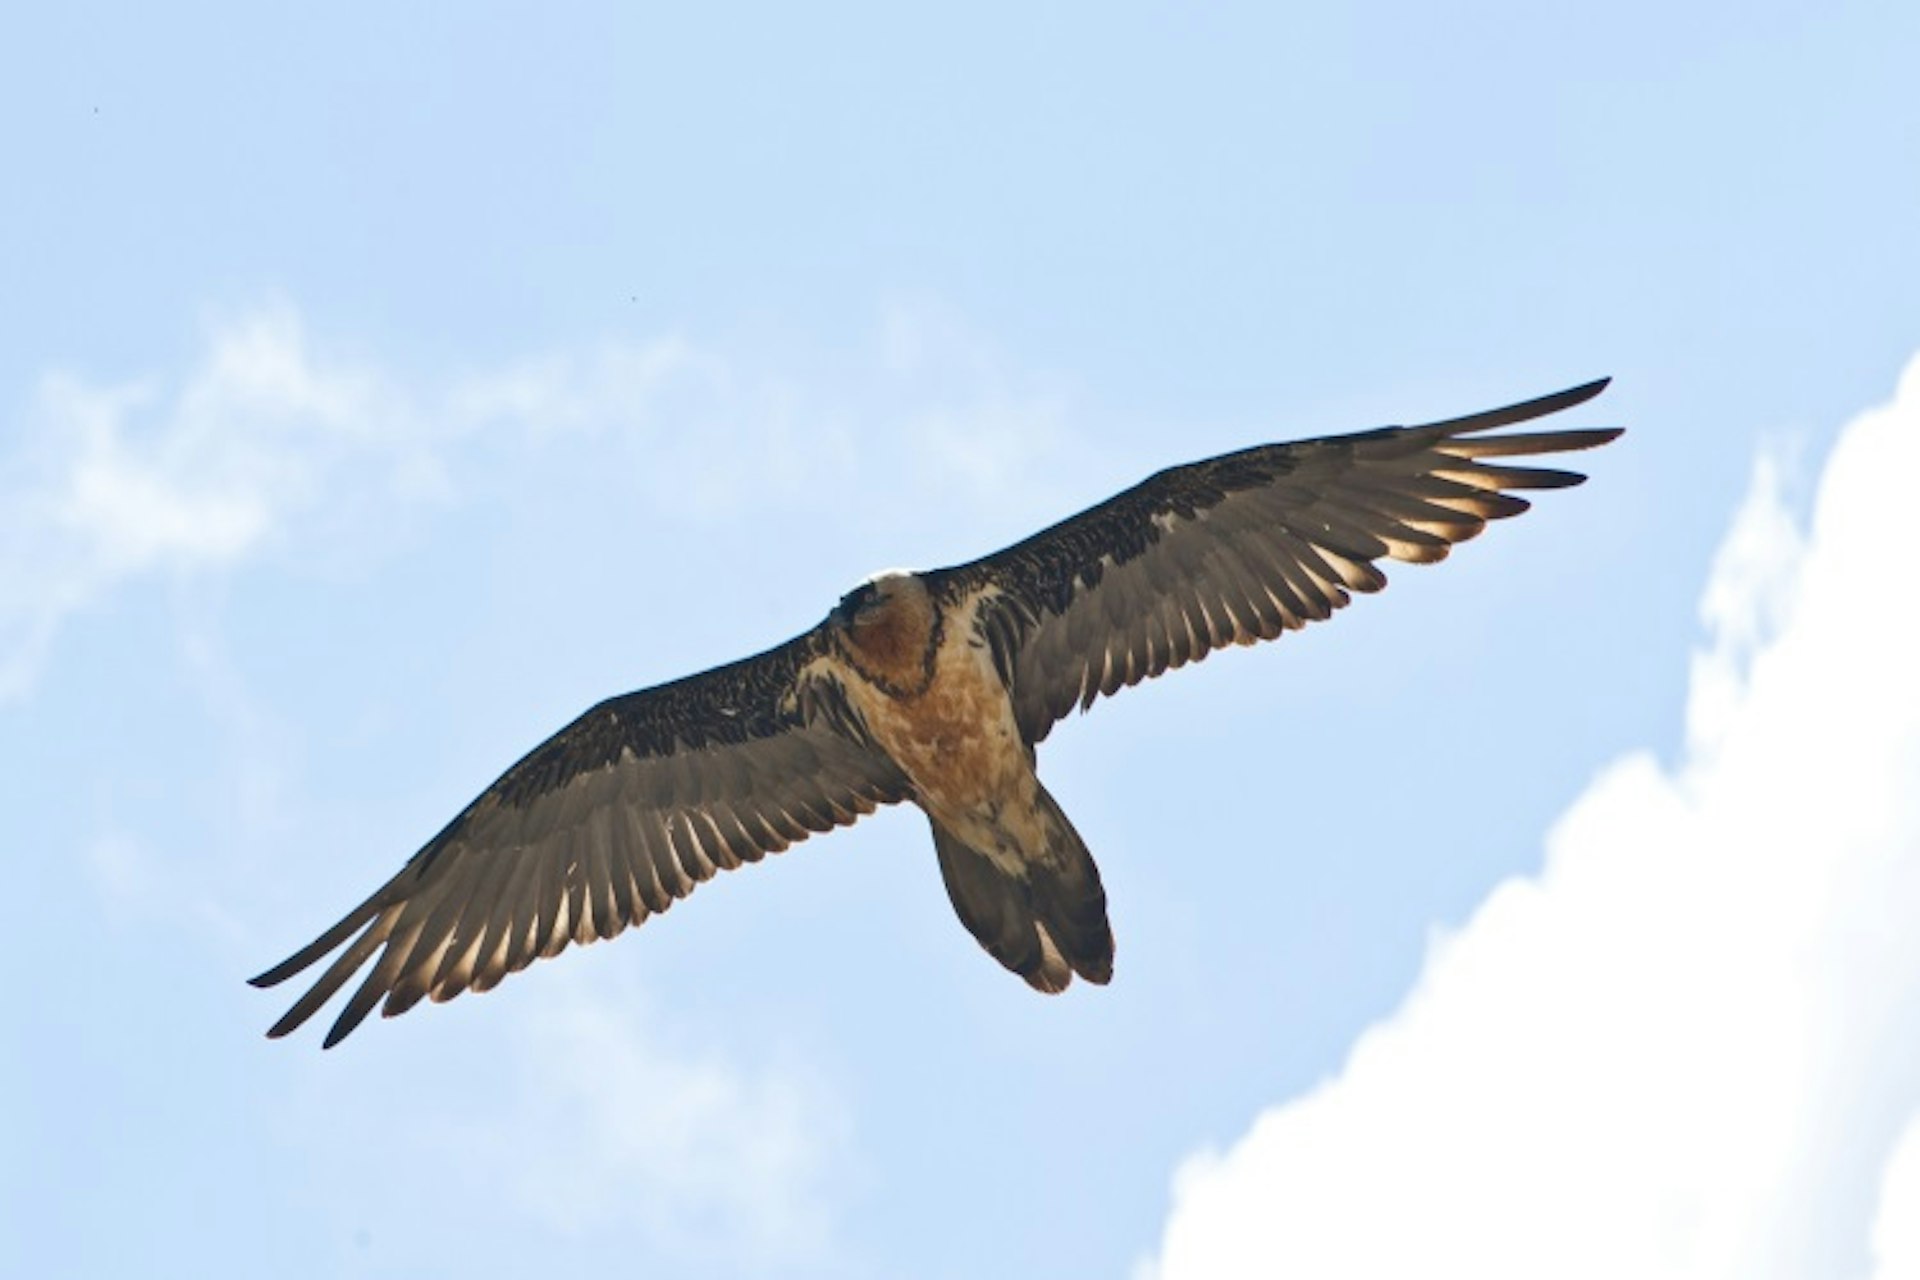 A bearded vulture glides high above the Swiss National Park. Image courtesy of the Swiss National Park.